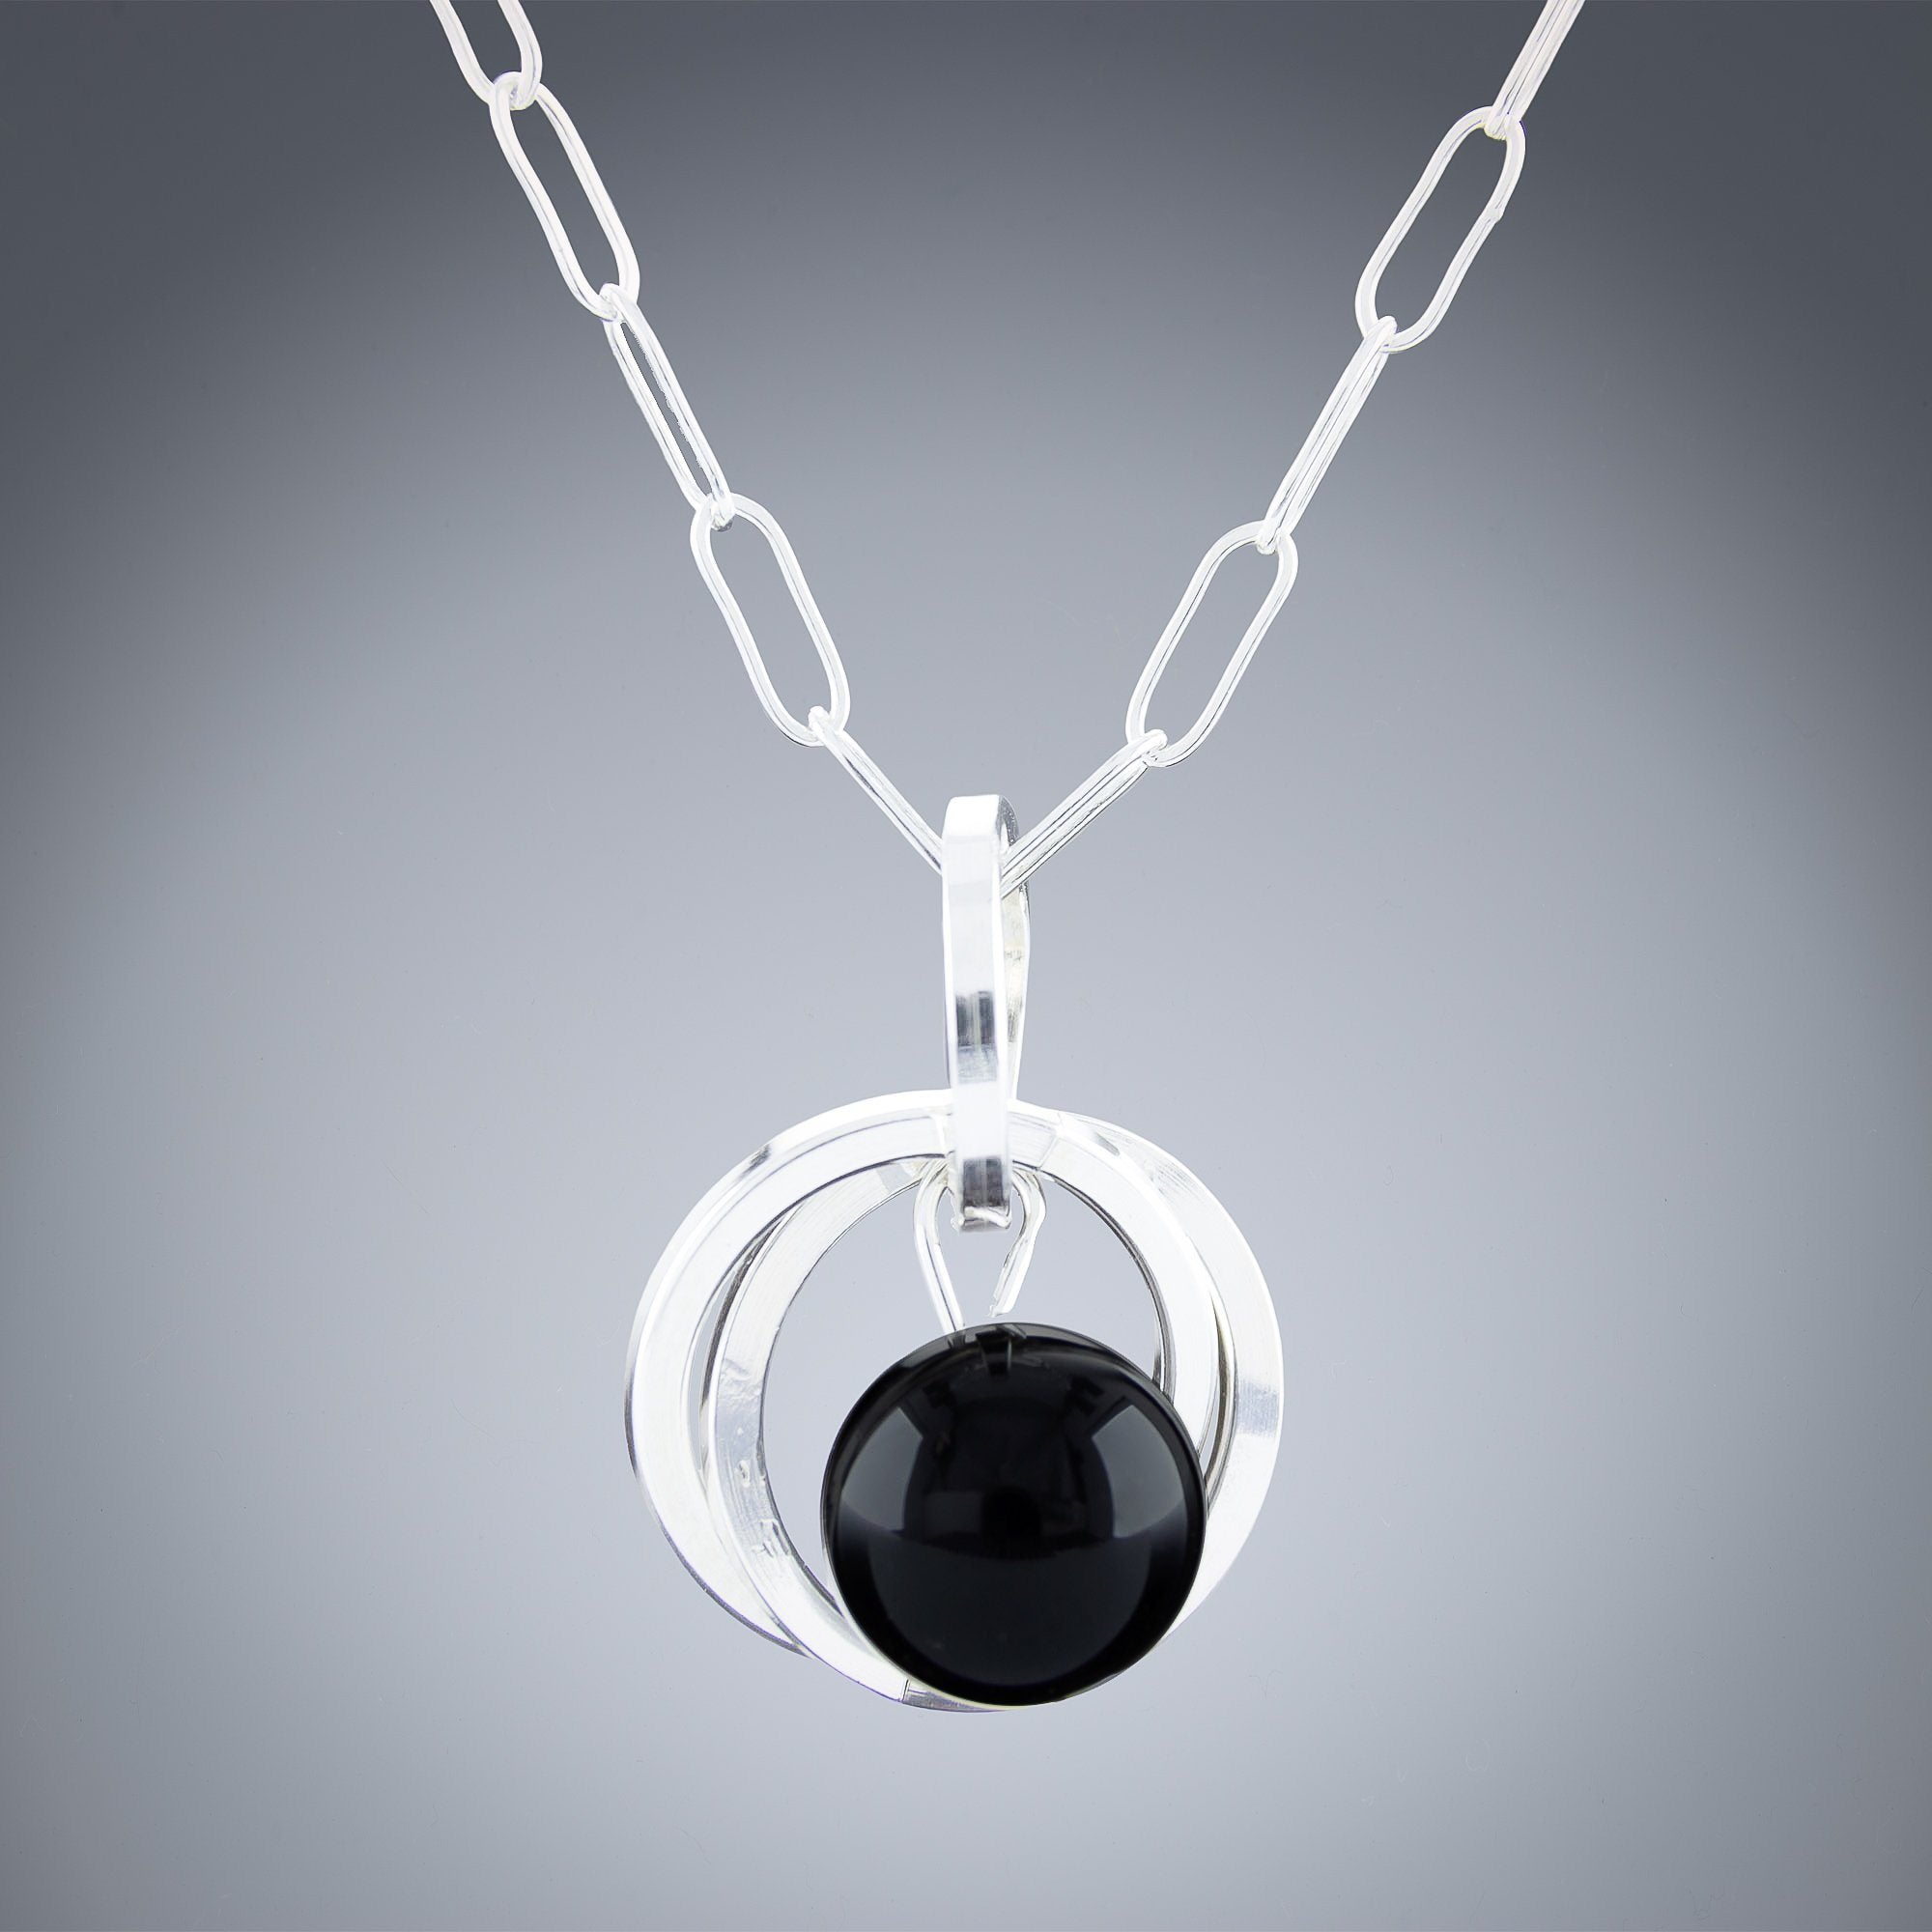 40% OFF - Handcrafted Black Onyx Genuine Gemstone Pendant Necklace in Argentium Sterling Silver